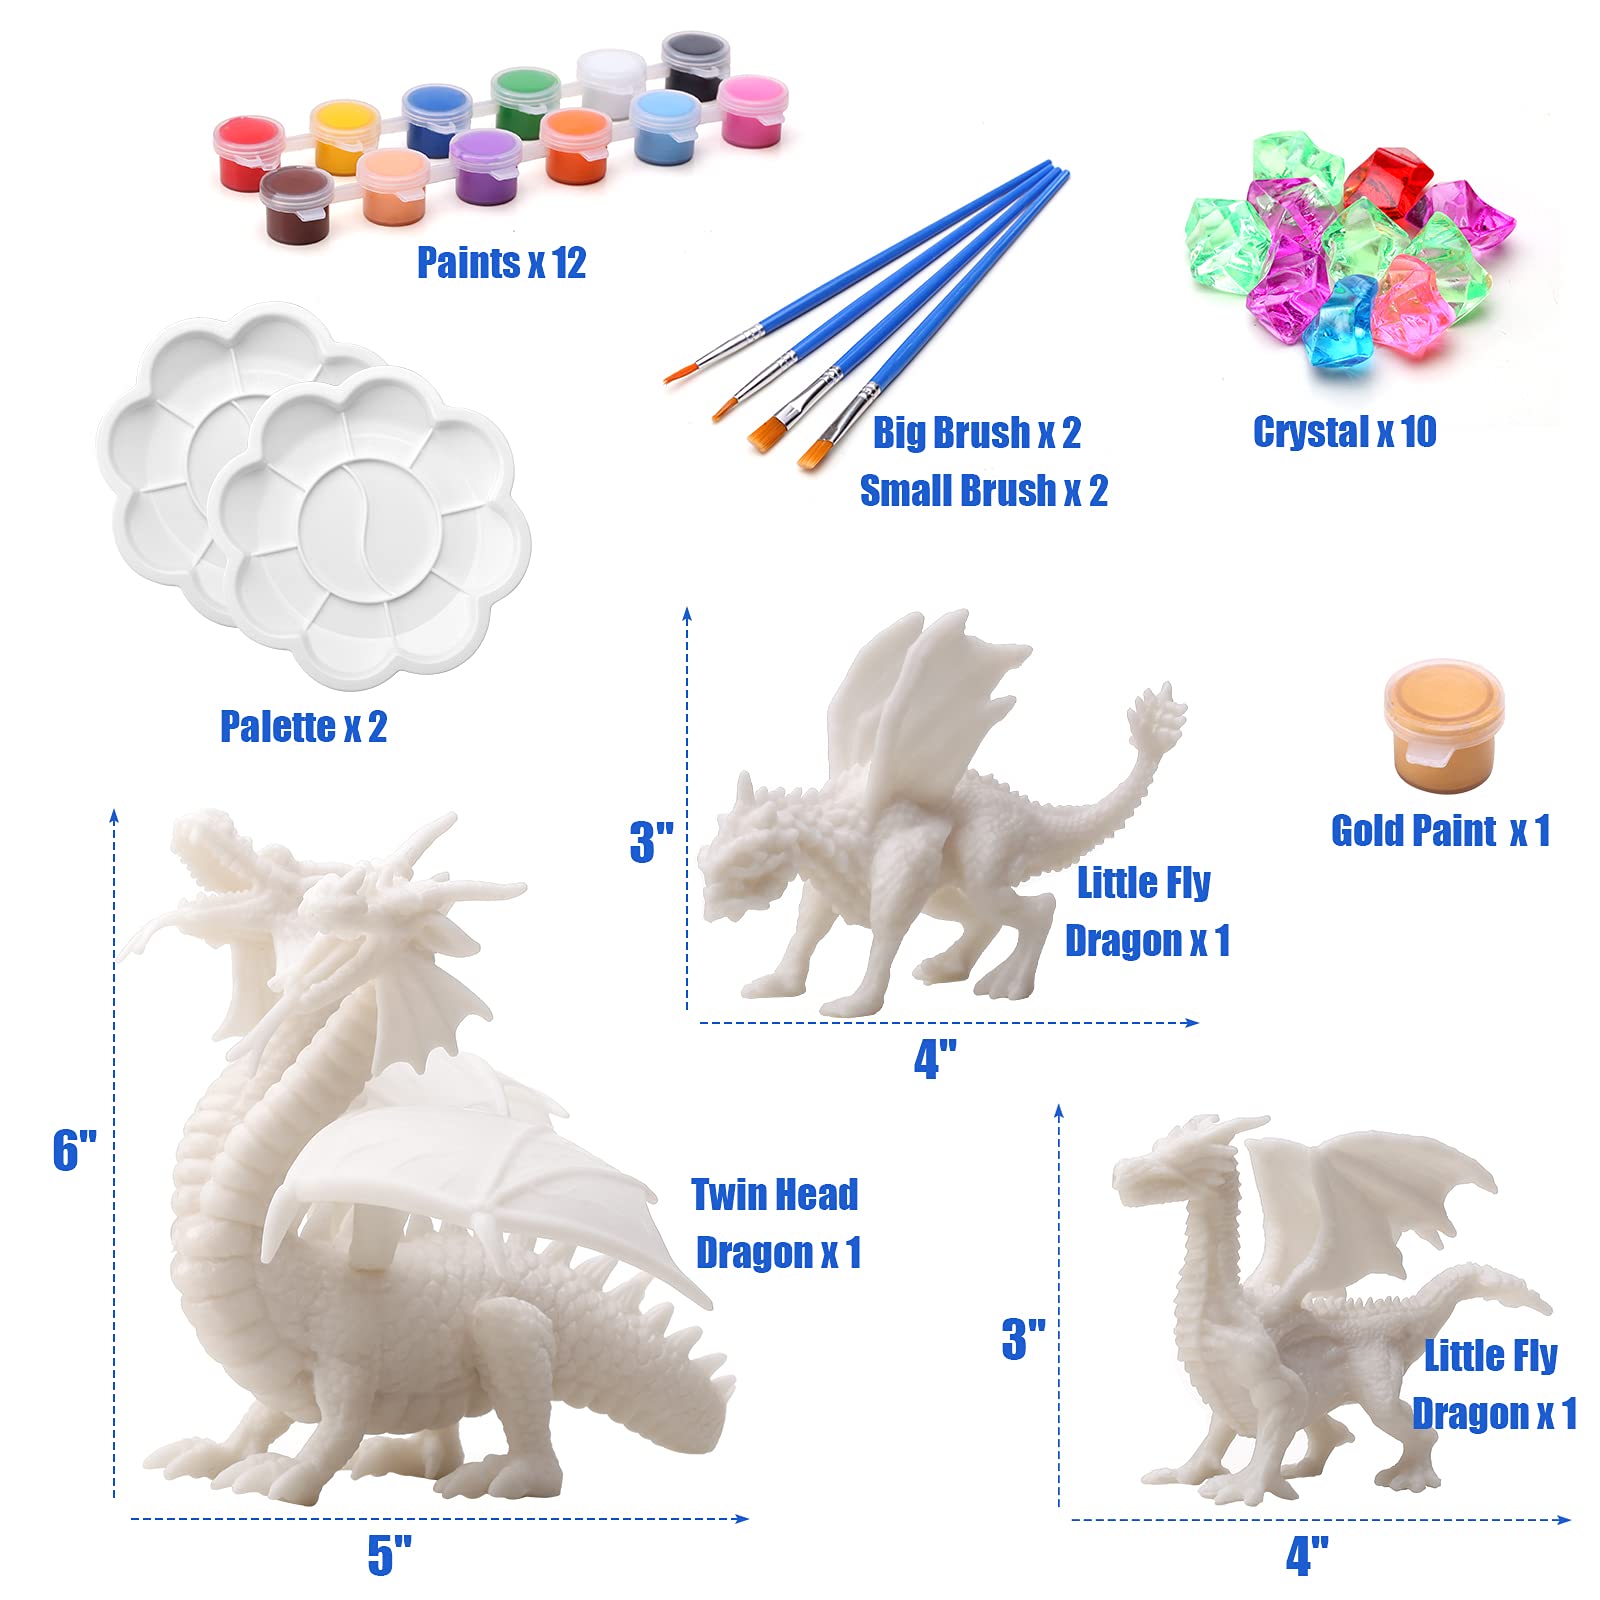 SOLDAY Dragon Toys Painting Kit for Kids to Make Your Own Paintable Miniature Figure Arts and Crafts Supplies Birthday Party Gift for Boys Girls Ages 5 6 7 9 12